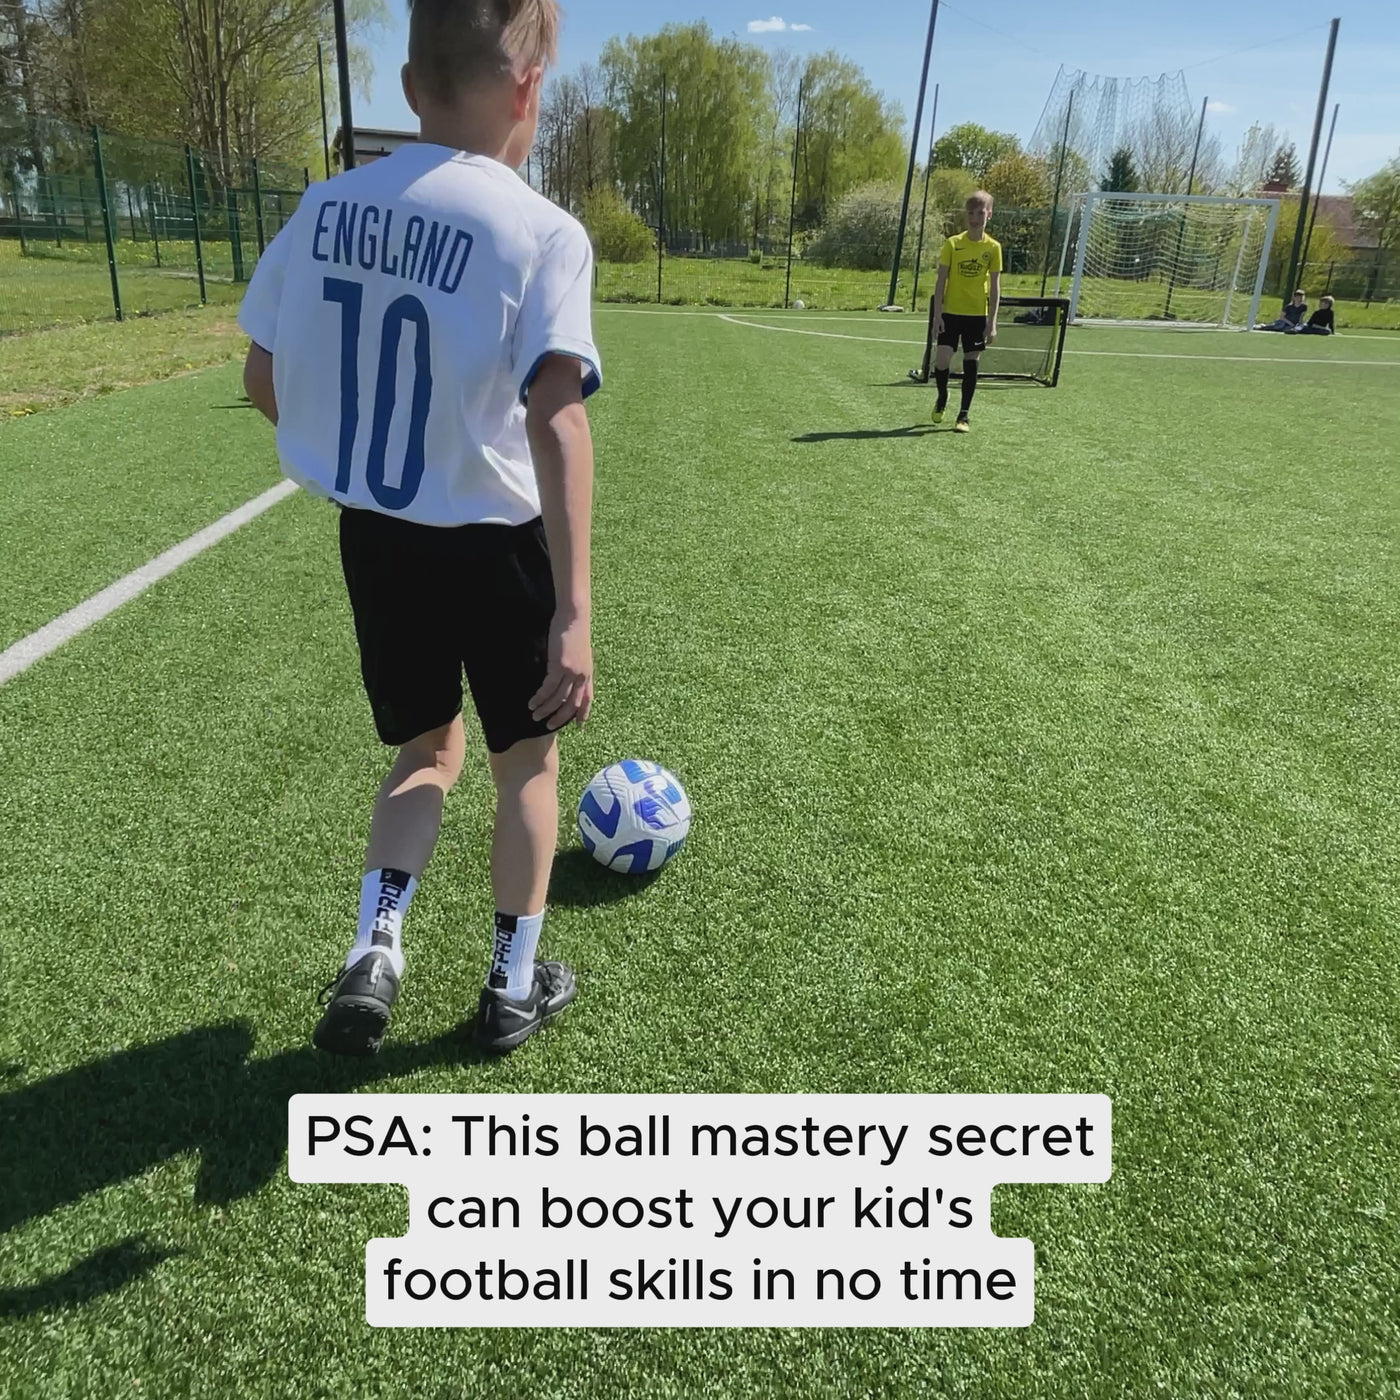 FPRO™ Ball Mastery Mat and Training Program